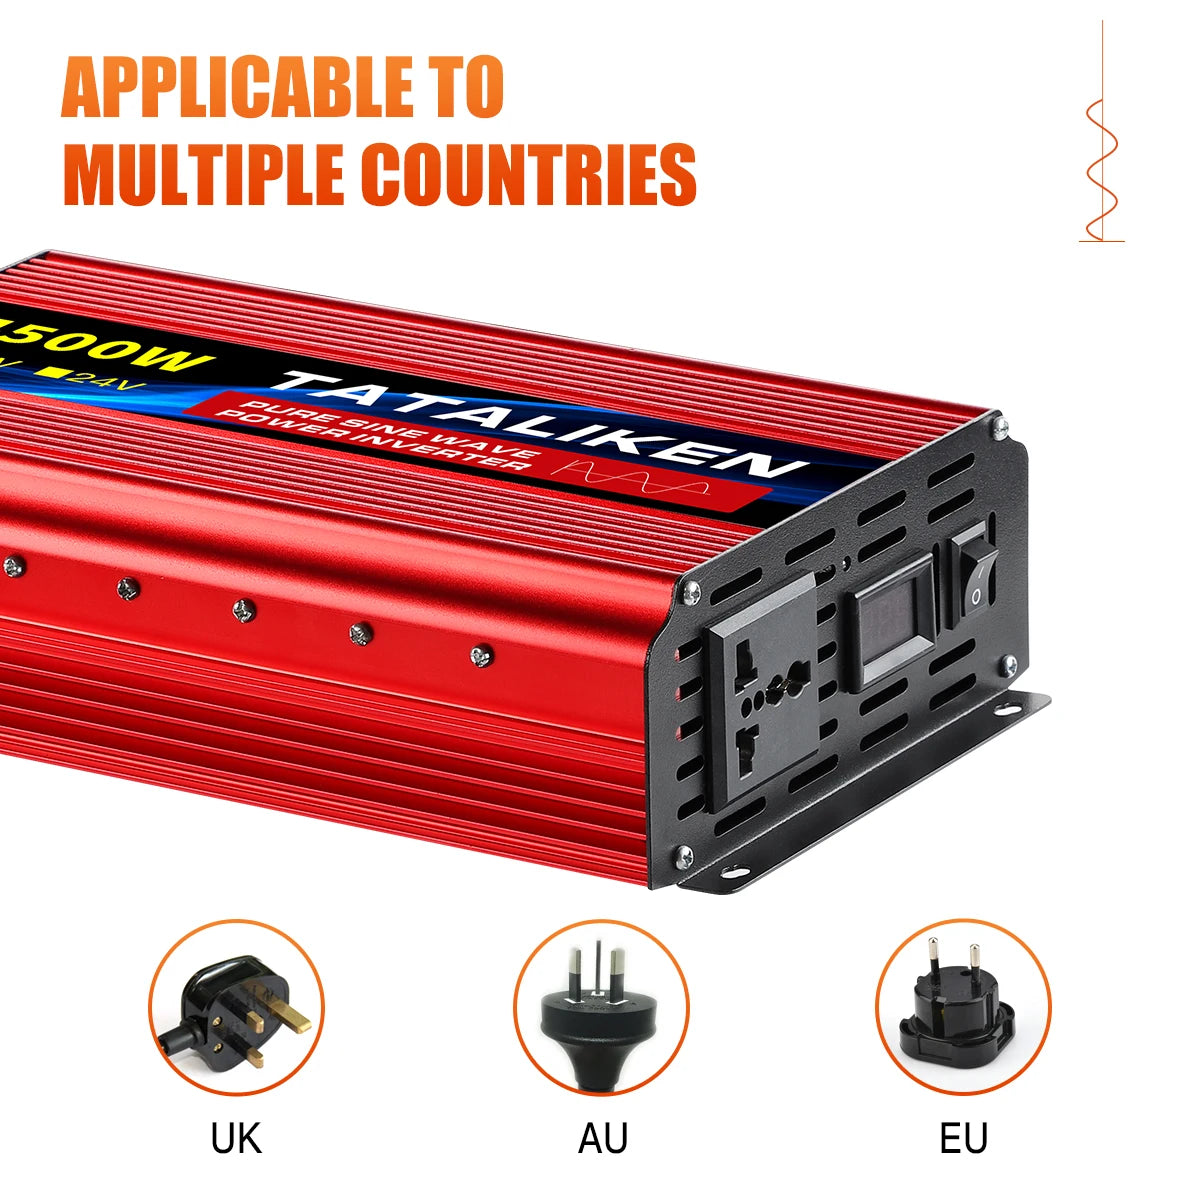 Inverter, Global suitability for various countries: UK, Australia, EU, US, Canada and more.